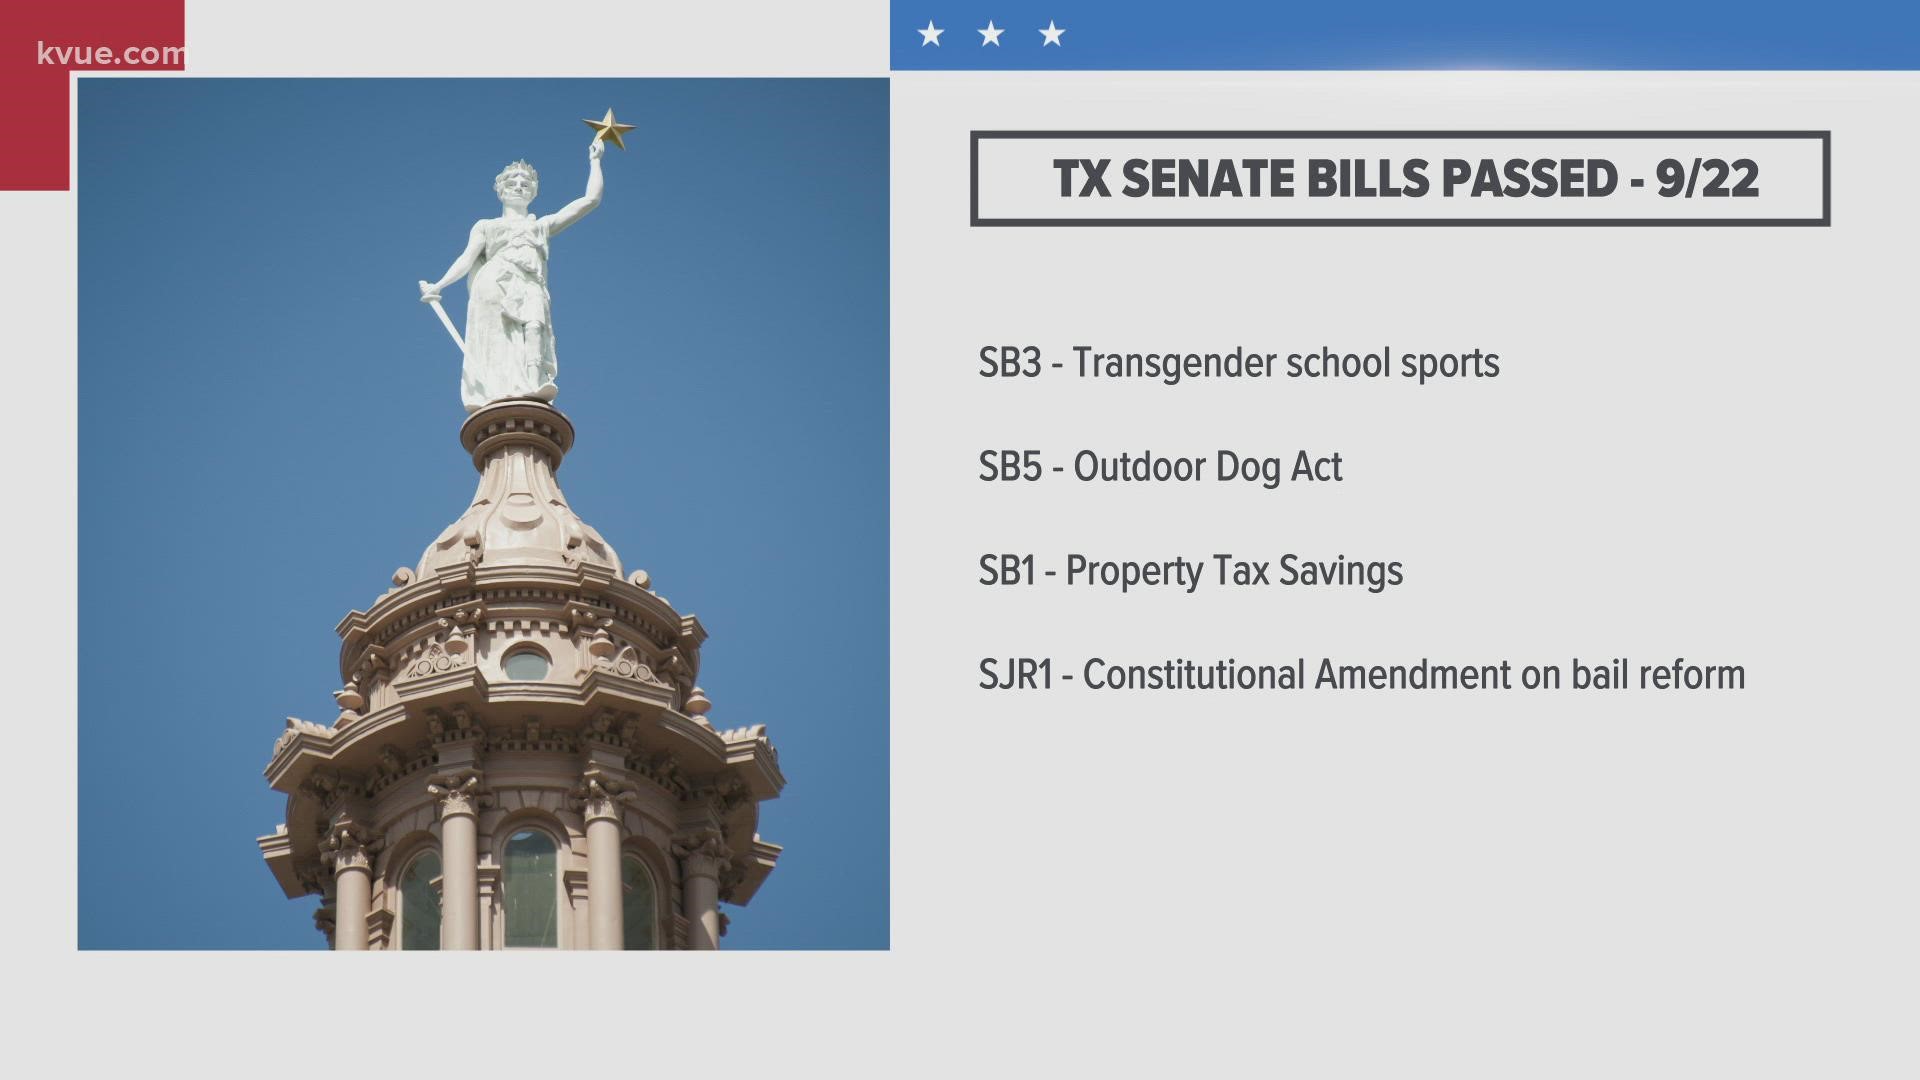 The bills passed Wednesday will be sent to the House.